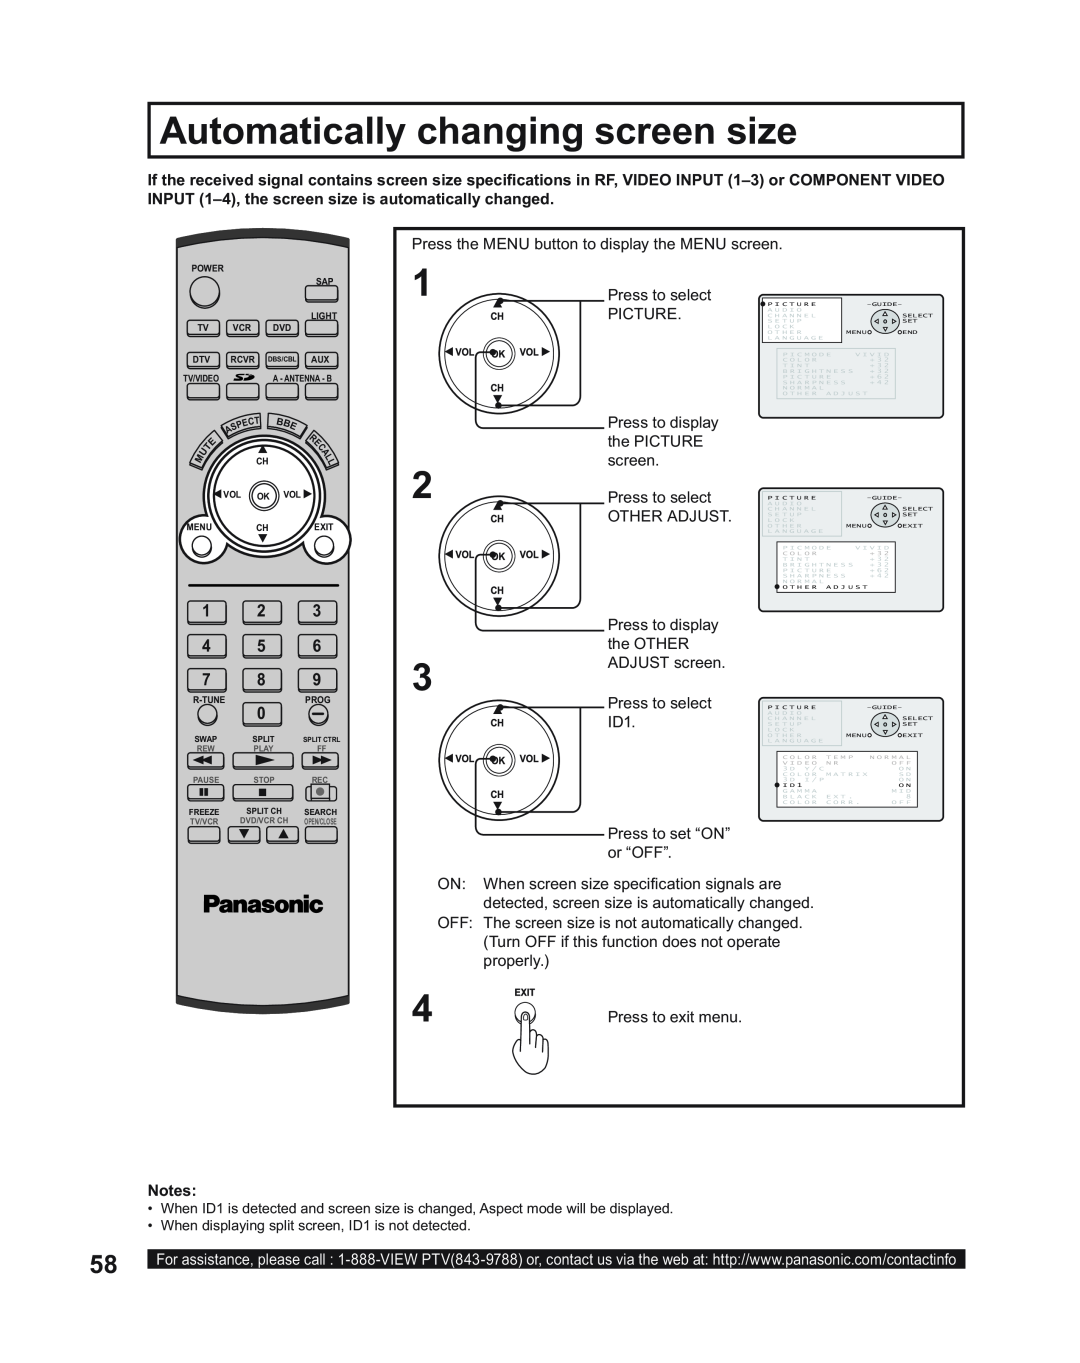 Panasonic PT-50LC14, PT-43LC14 manual Automatically changing screen size, When displaying split screen, ID1 is not detected 